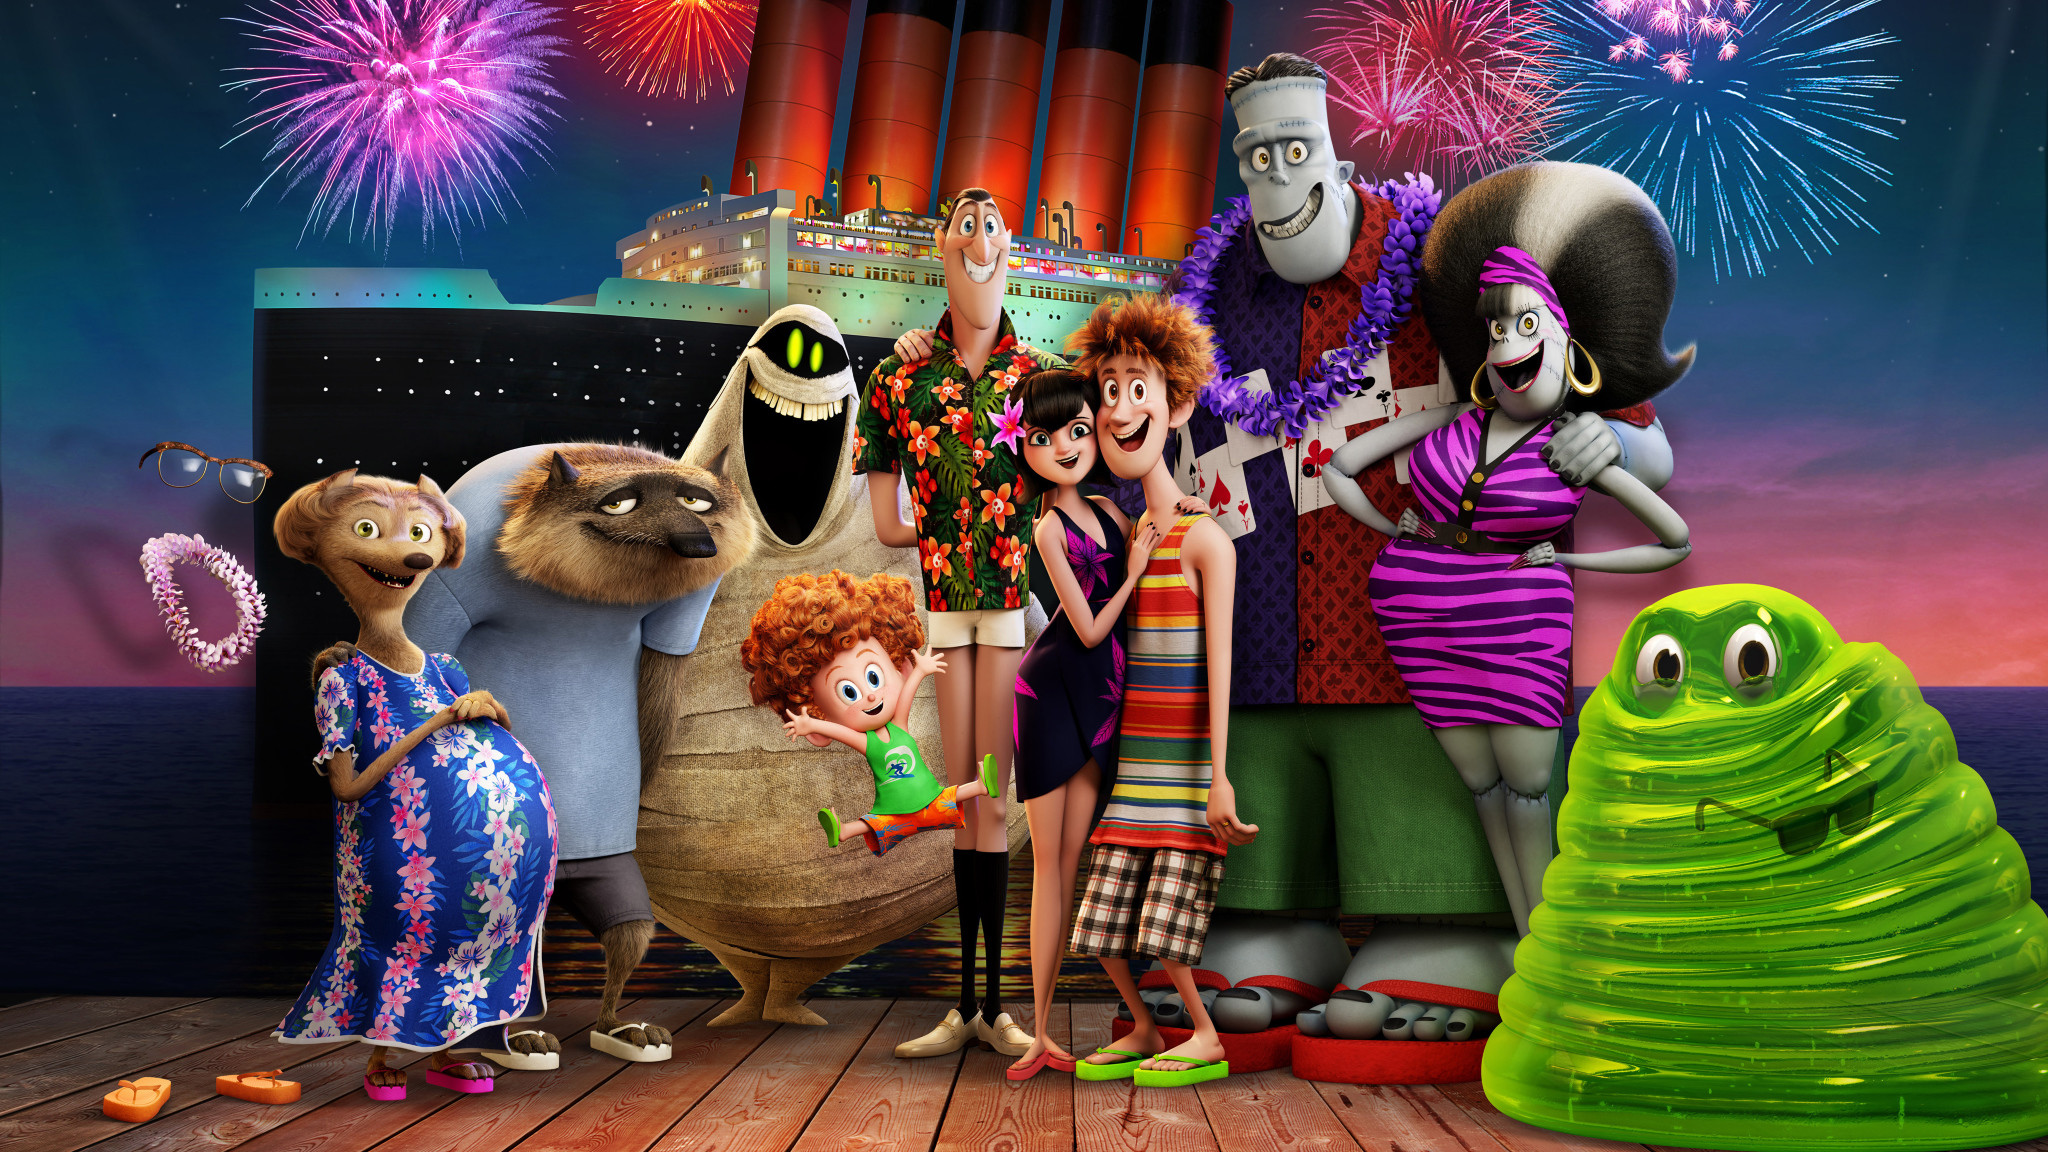 2048x1152 Hotel Transylvania 3: Summer Vacation sets sails in theaters on July 13th,  2017